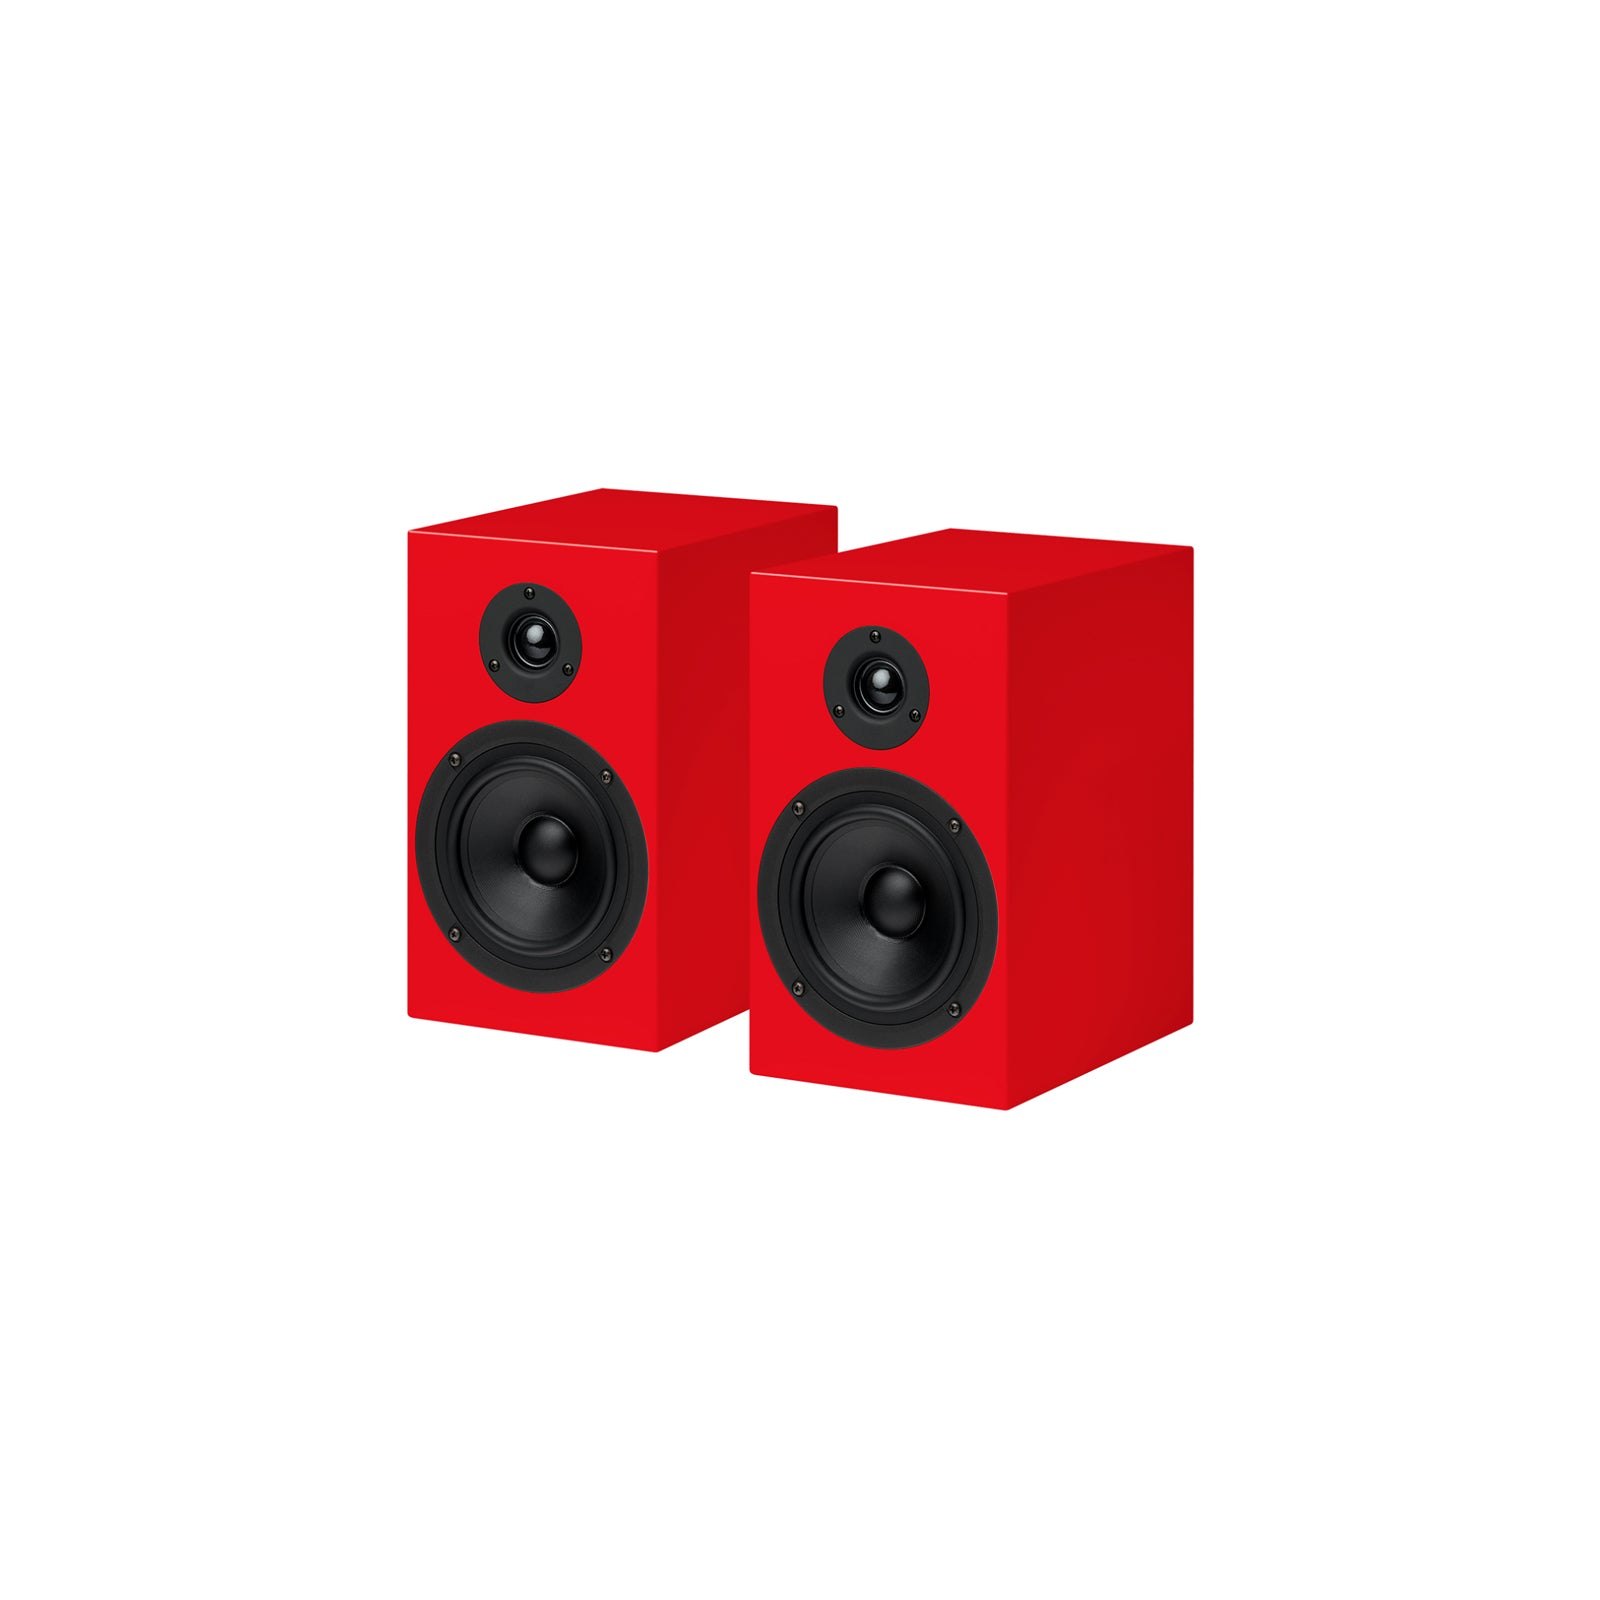 Image of Pro ject Speakers Box 5 Two-Way Monitor Speakers In Red